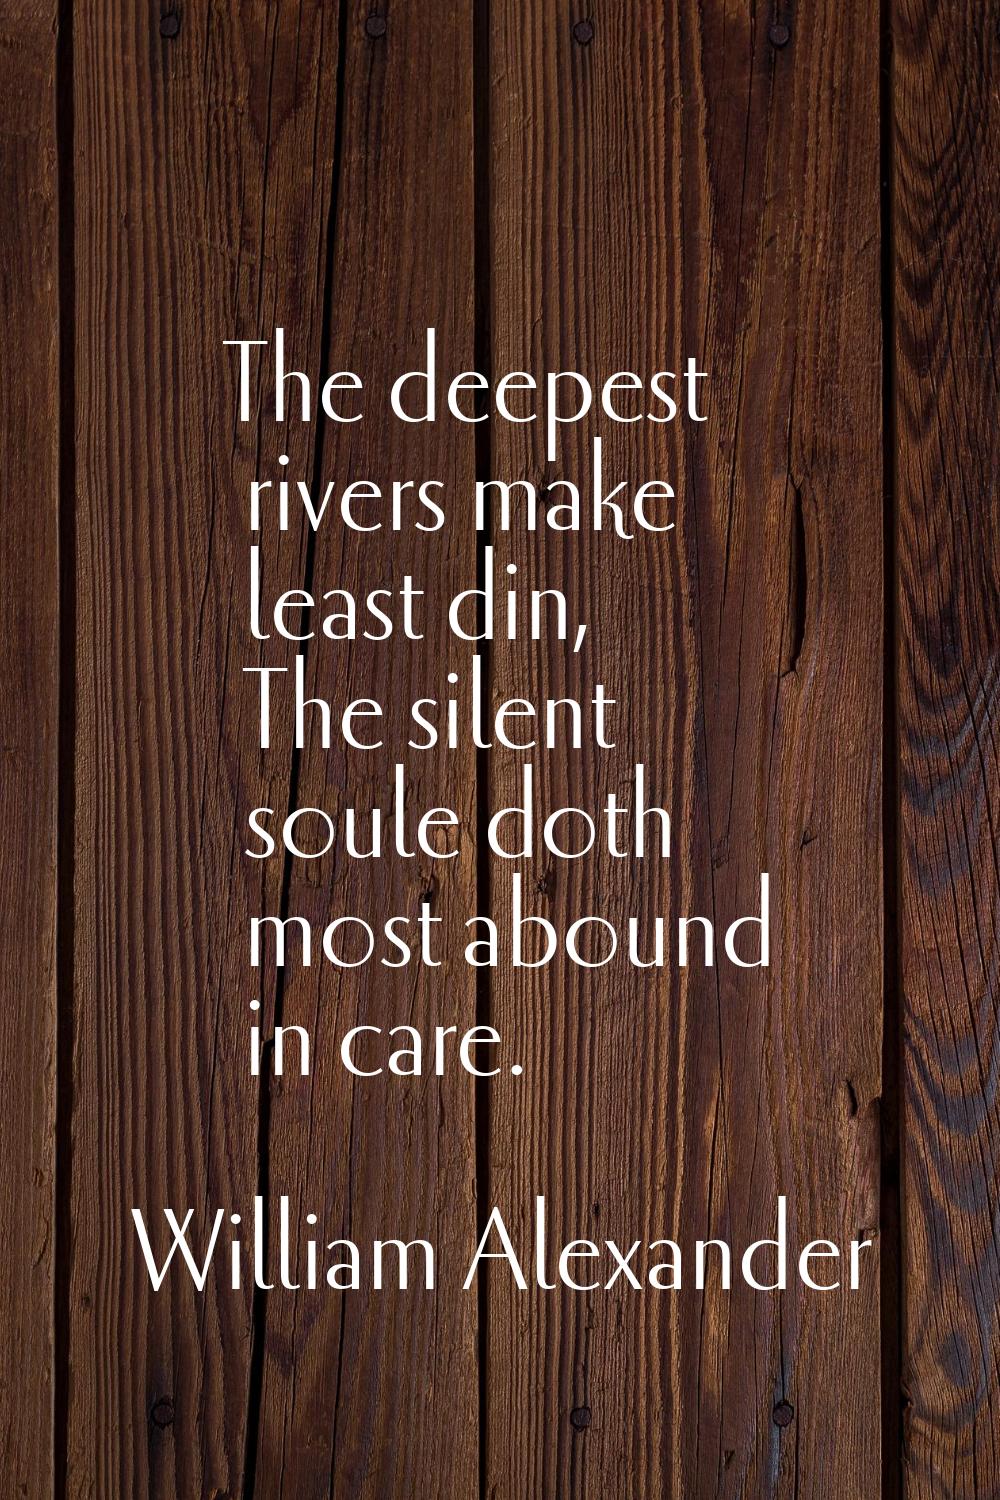 The deepest rivers make least din, The silent soule doth most abound in care.